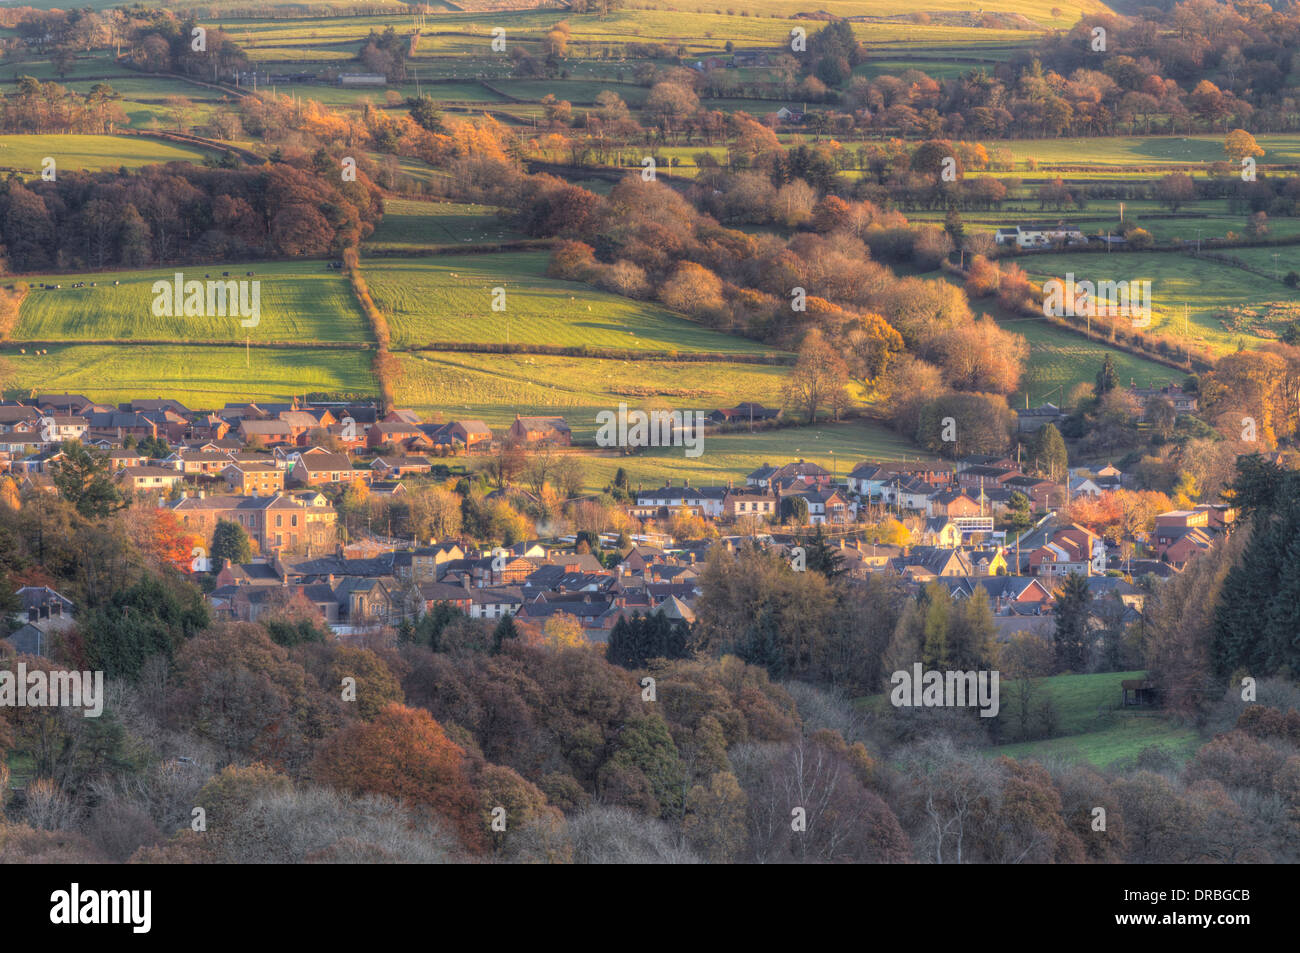 View of Llanidloes, a small town in the Welsh hills. Powys, Wales. November. Stock Photo